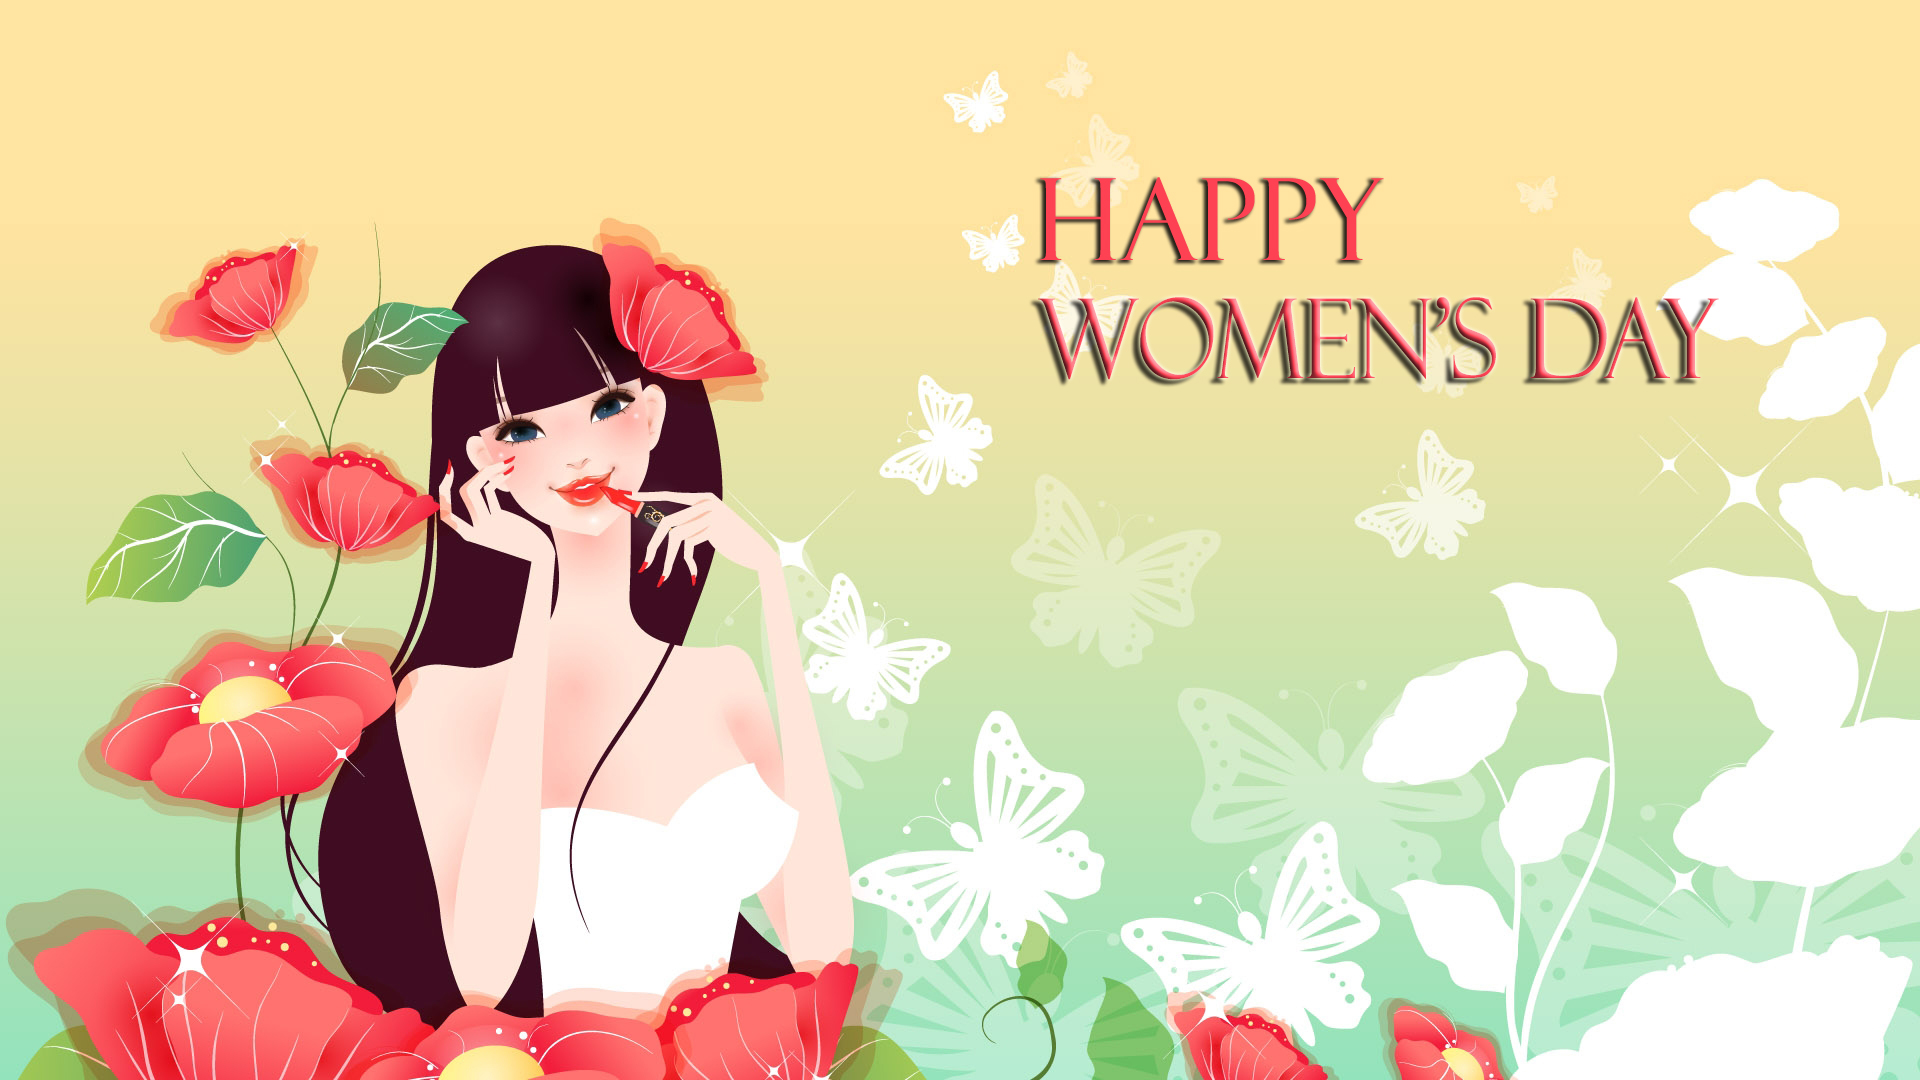 Happy Women's day! The best greeting card for You.